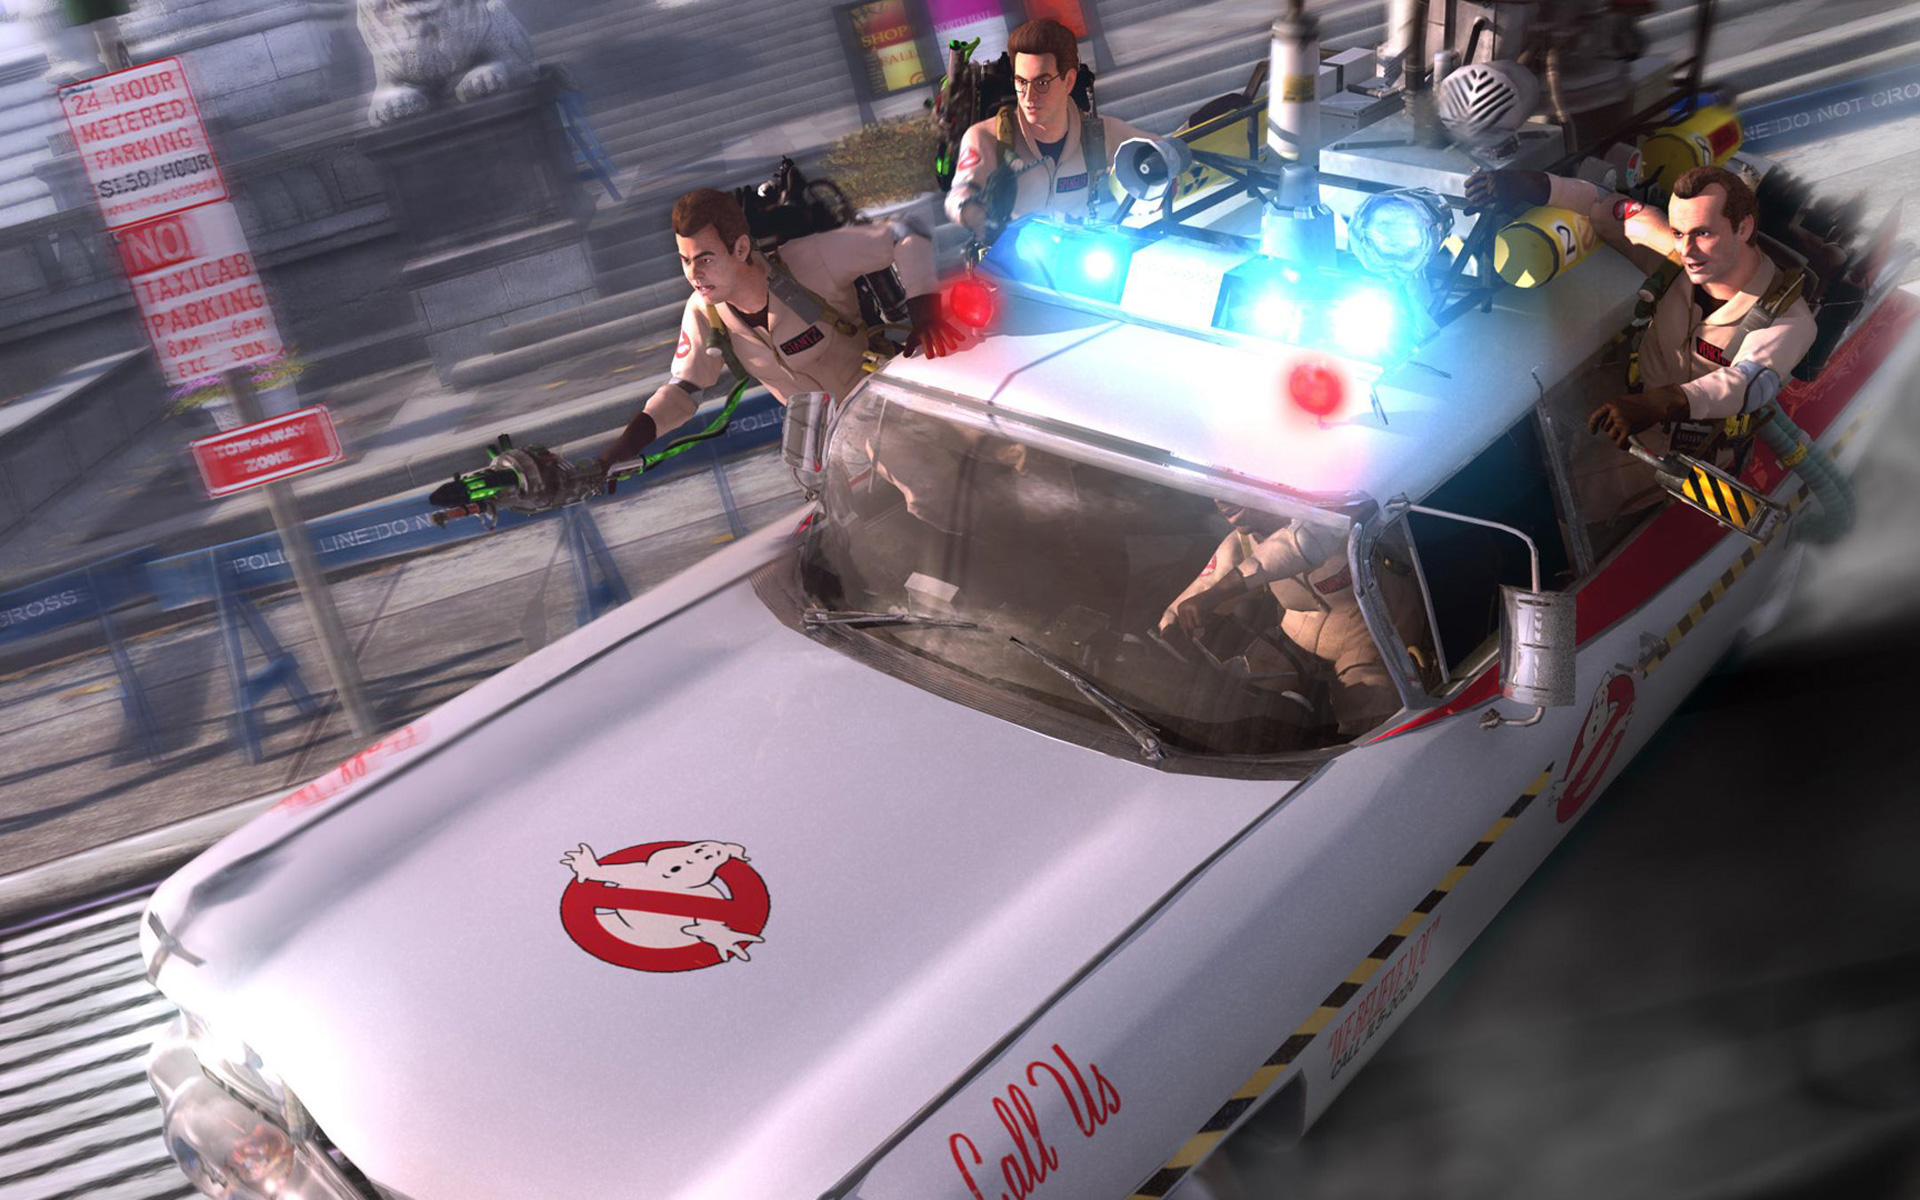 Ghostbusters PC Game Free Download